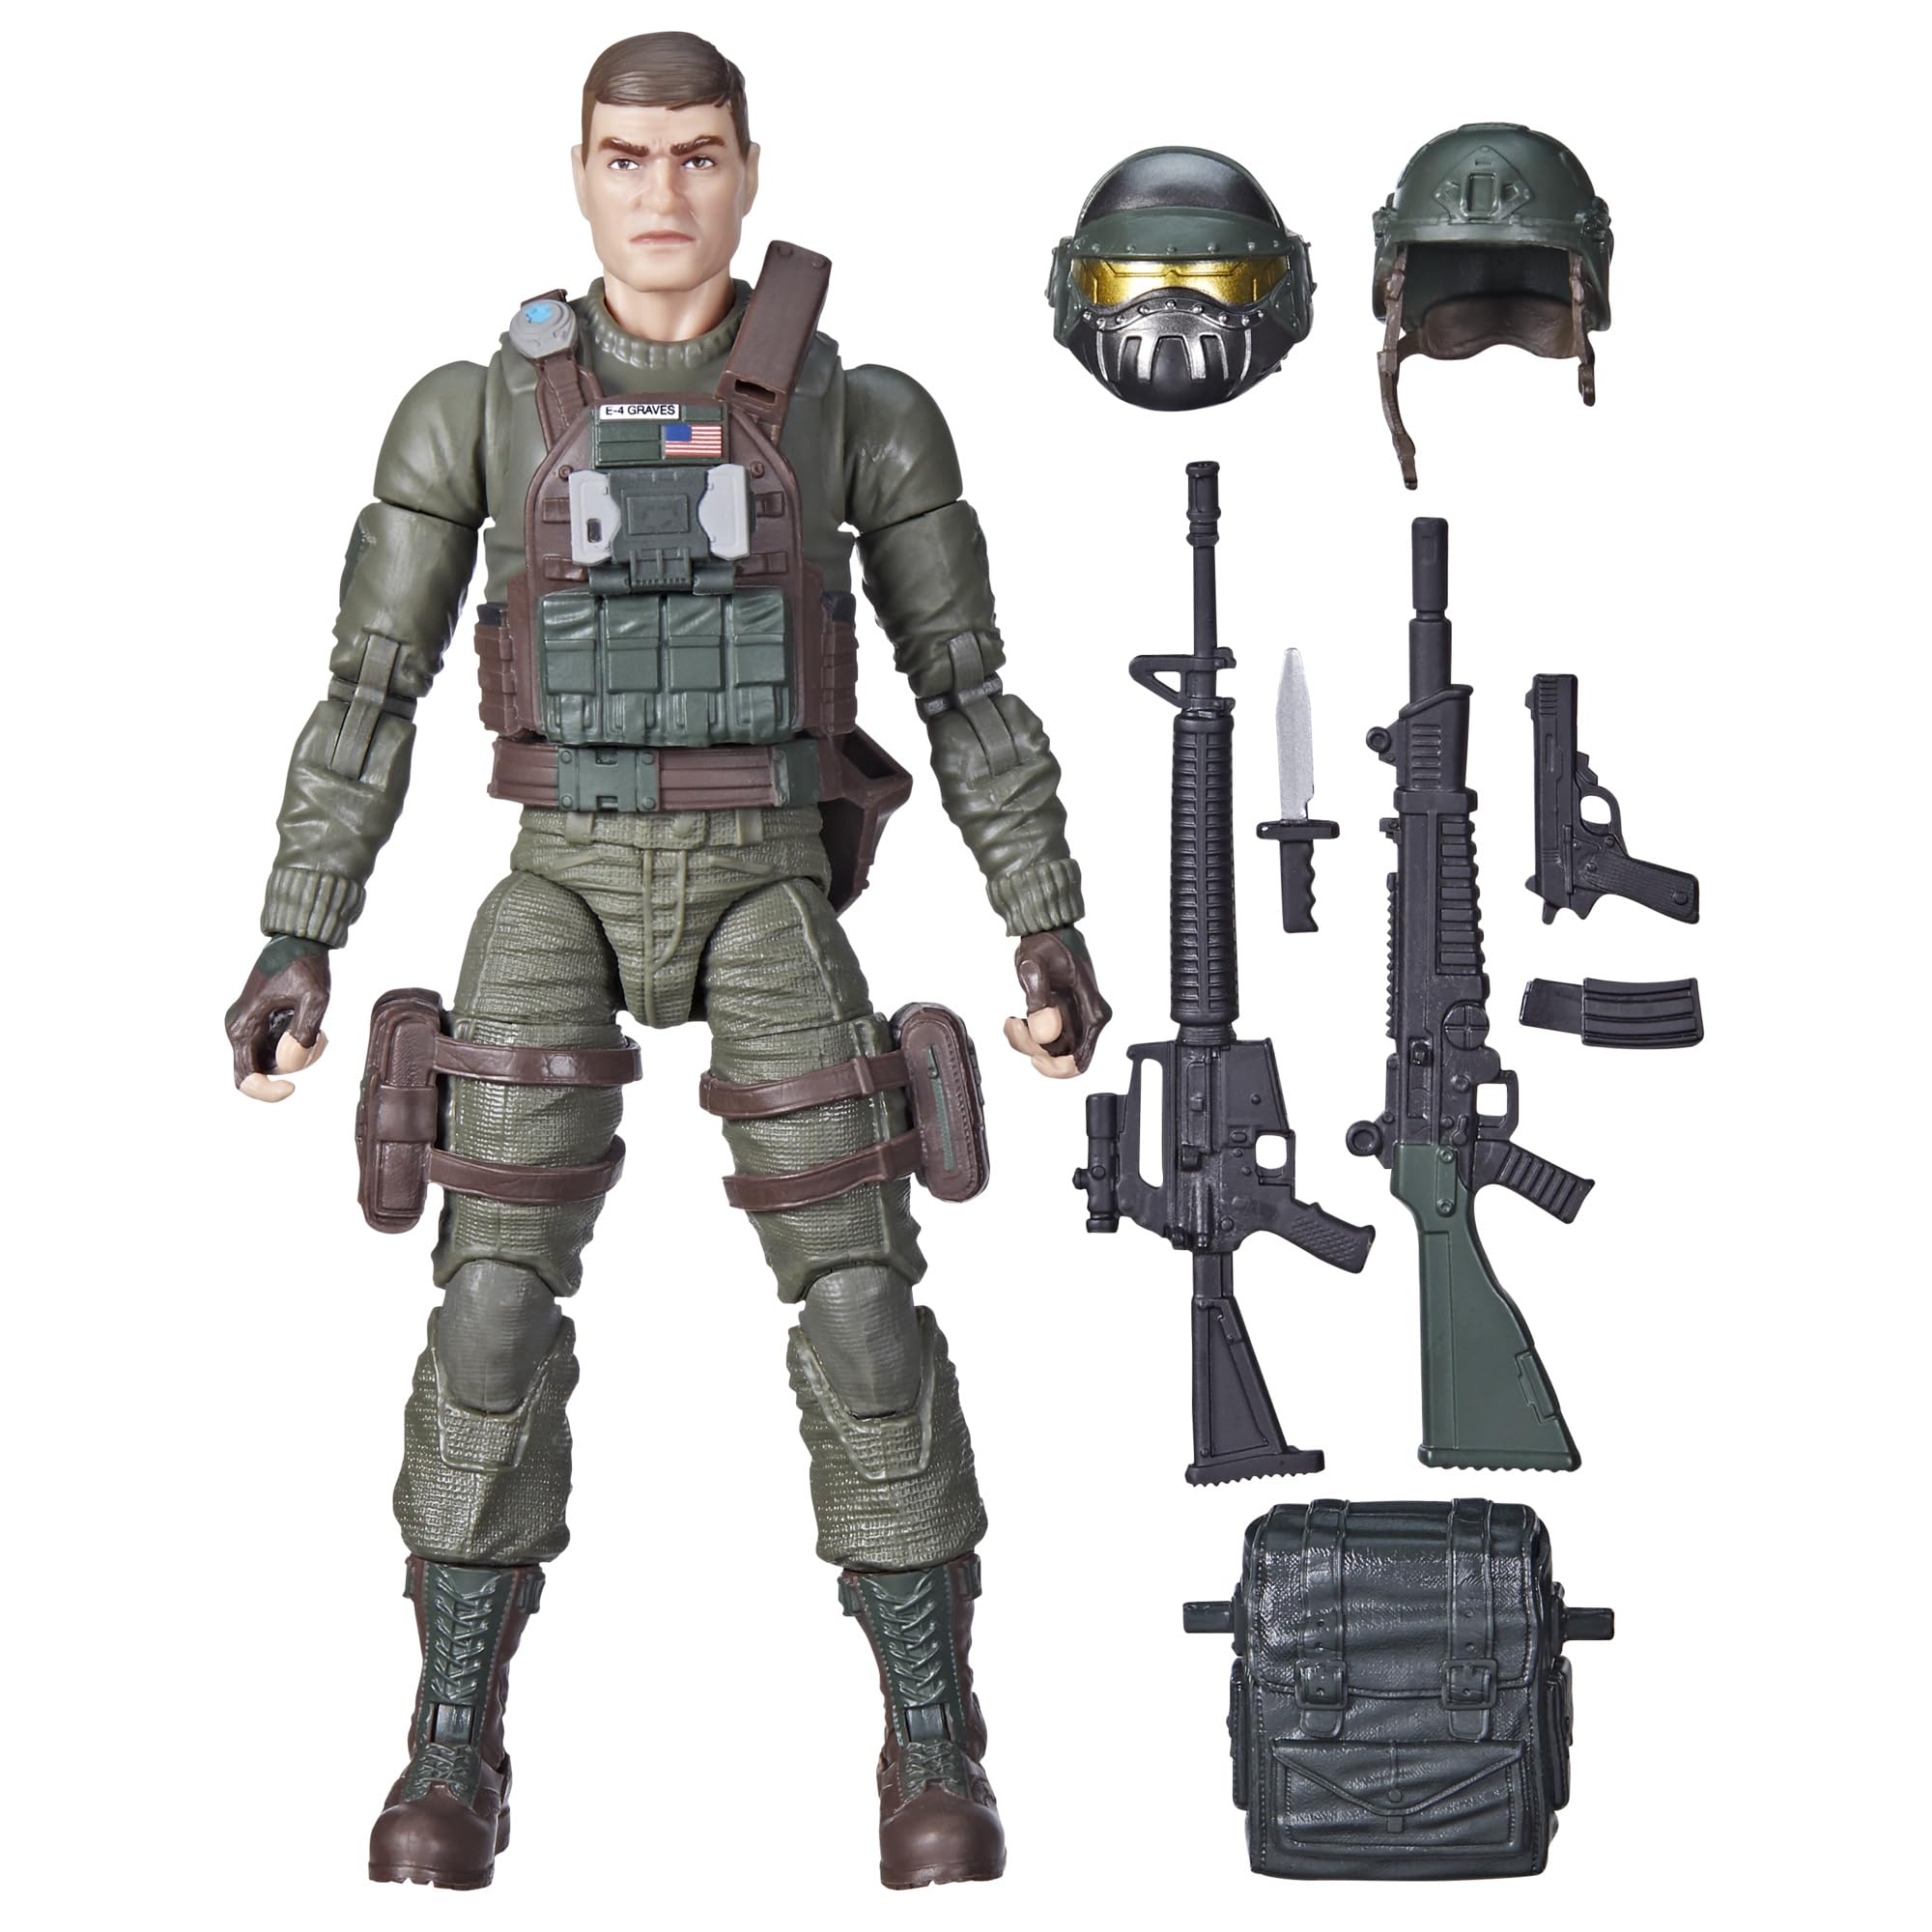 G.I. Joe Classified Series Robert Grunt Graves, Collectible G.I. Joe Action Figure, 87, 6-Inch Action Figures for Boys & Girls, with 8 Accessories